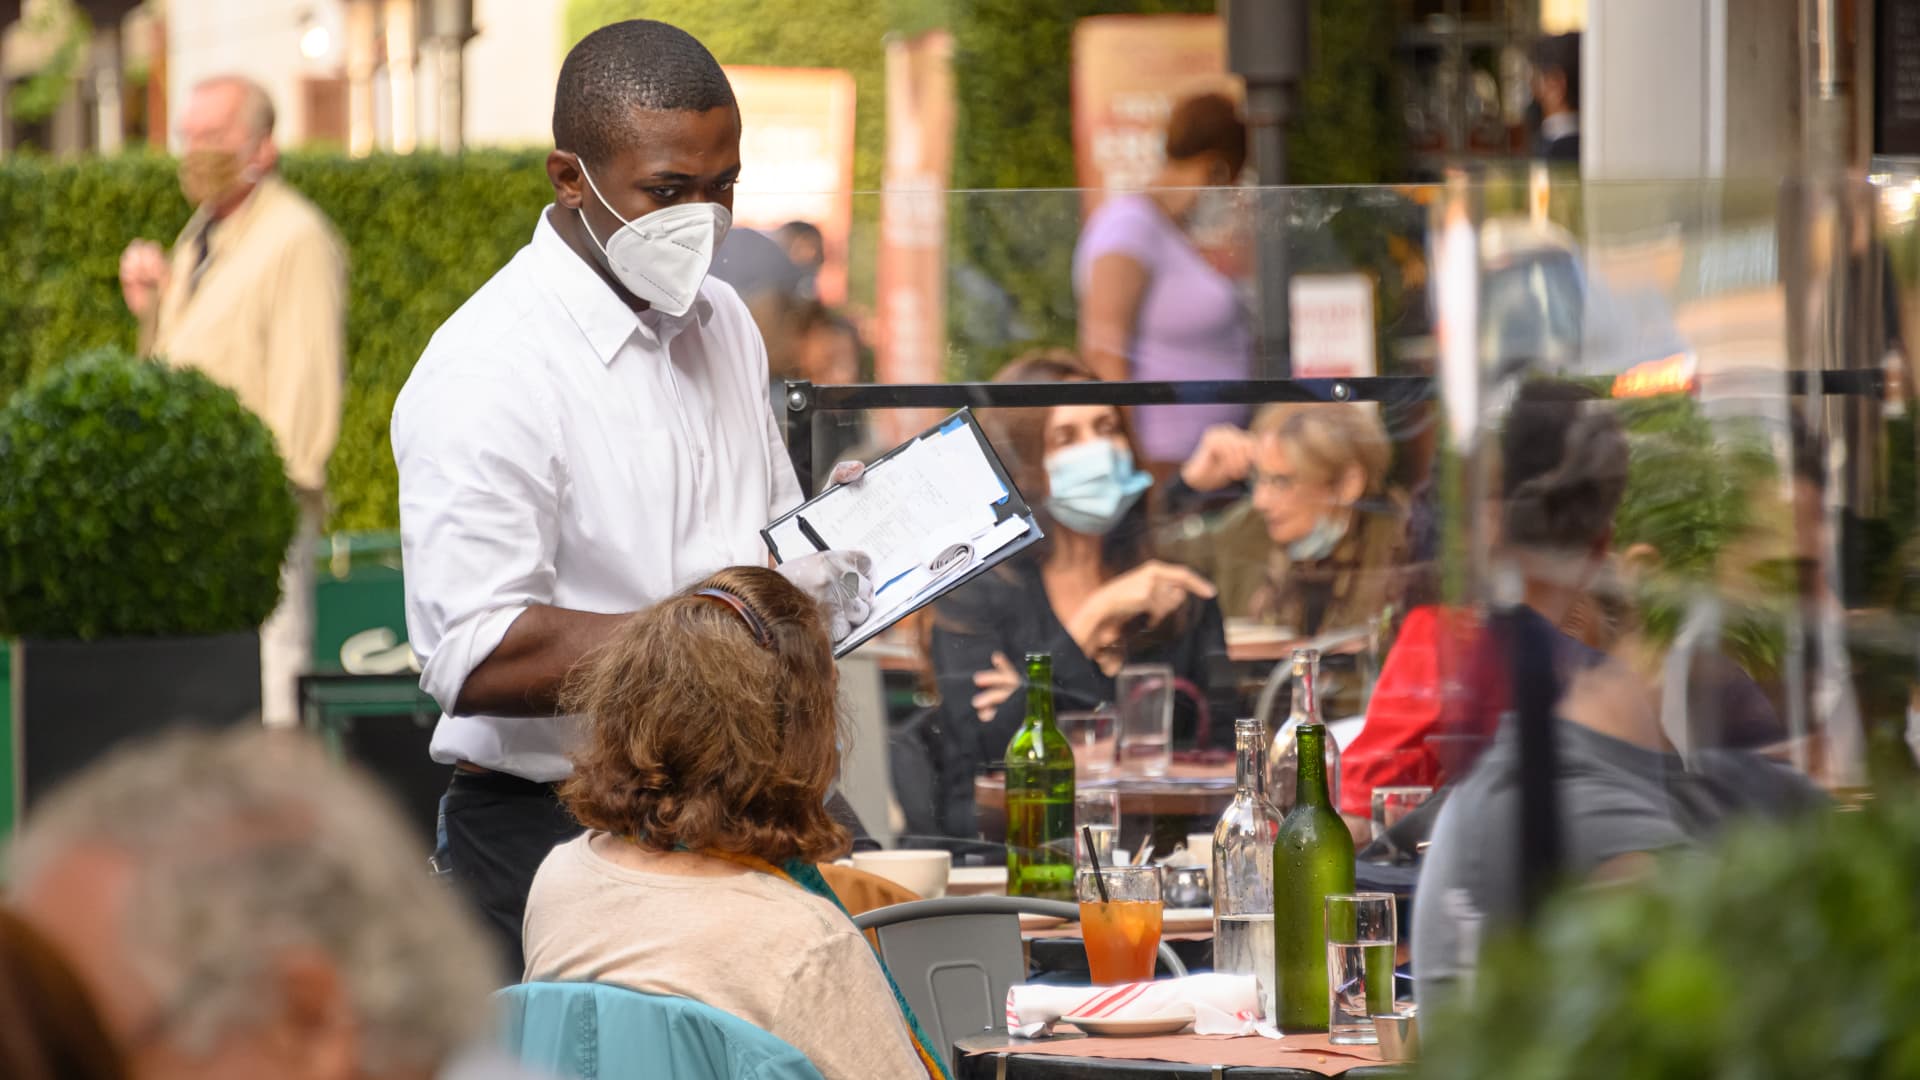 A New York City waiter wears a face mask at a restaurant on Manhattan's Upper West Side on Nov. 10, 2020.